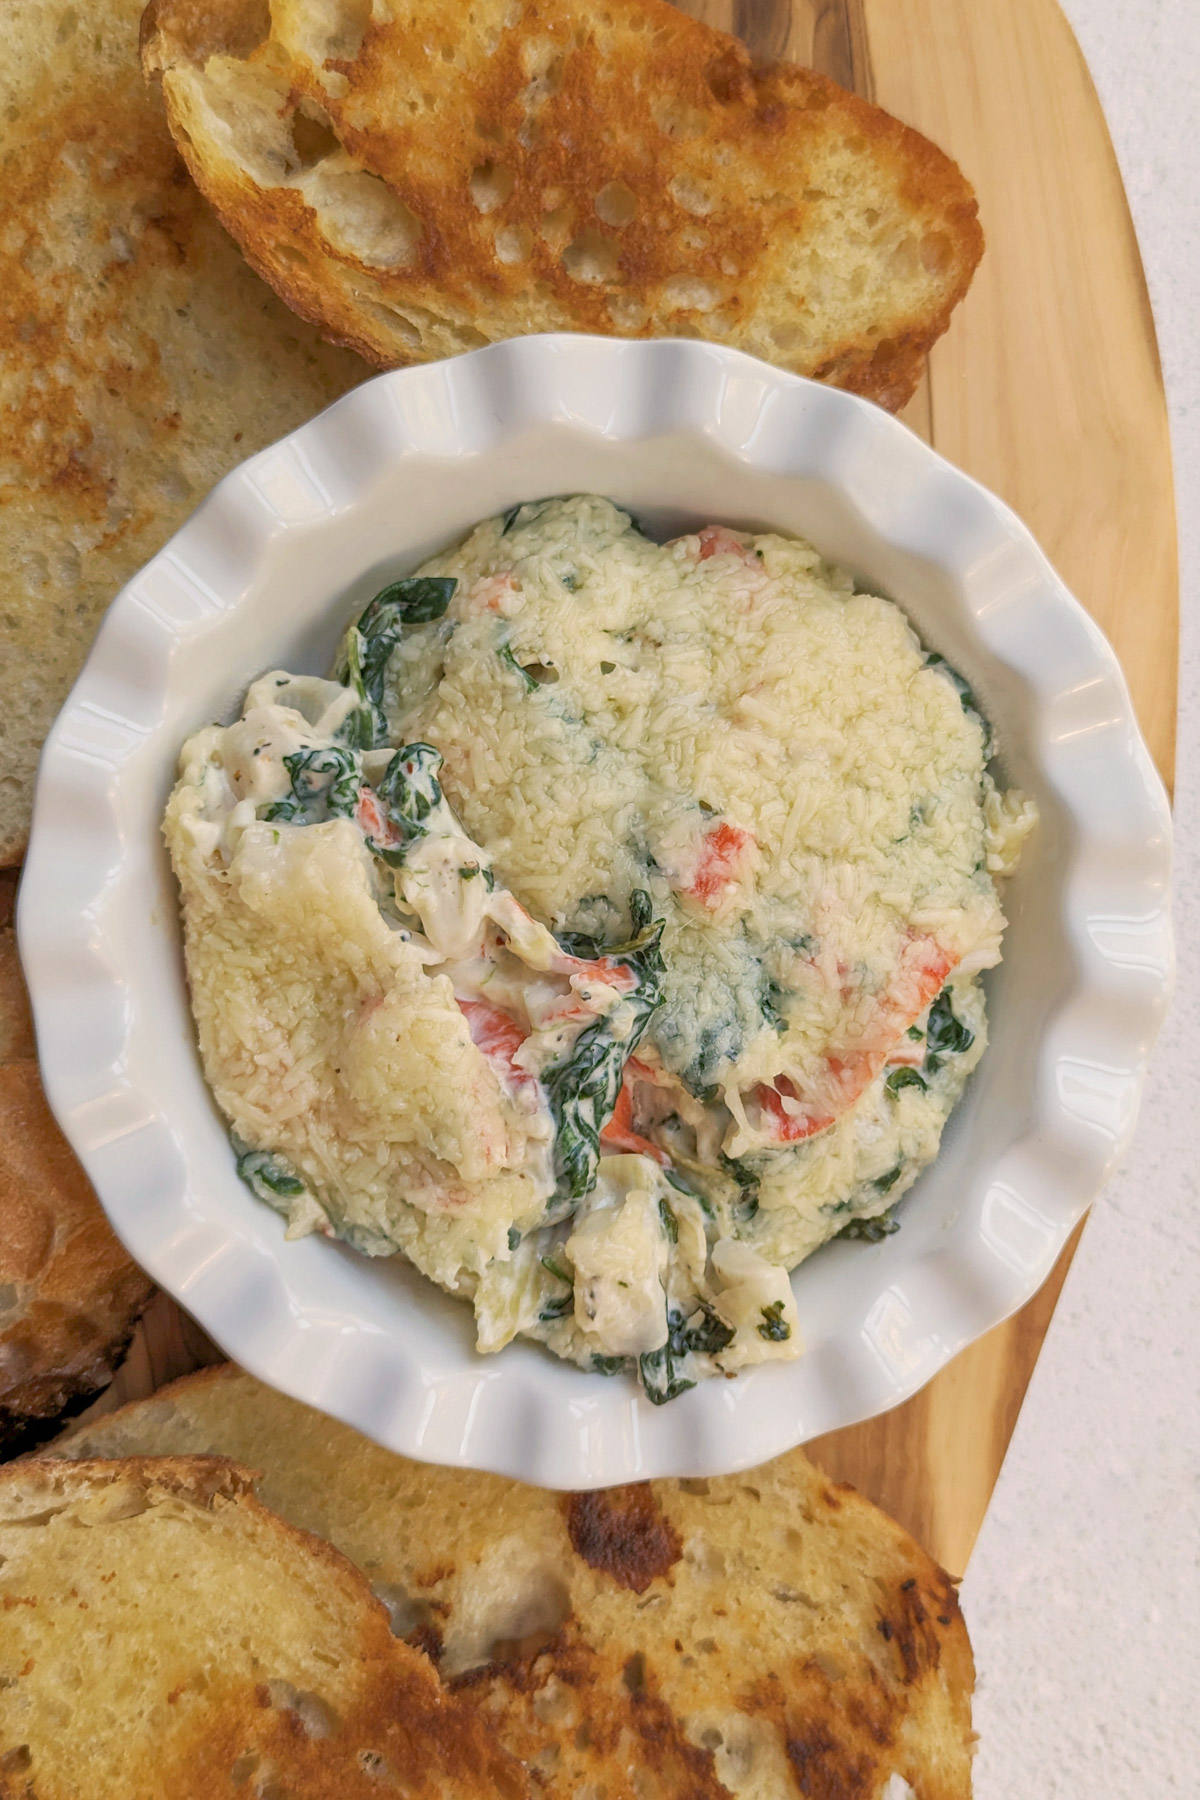 Crab spinach dip with bread.